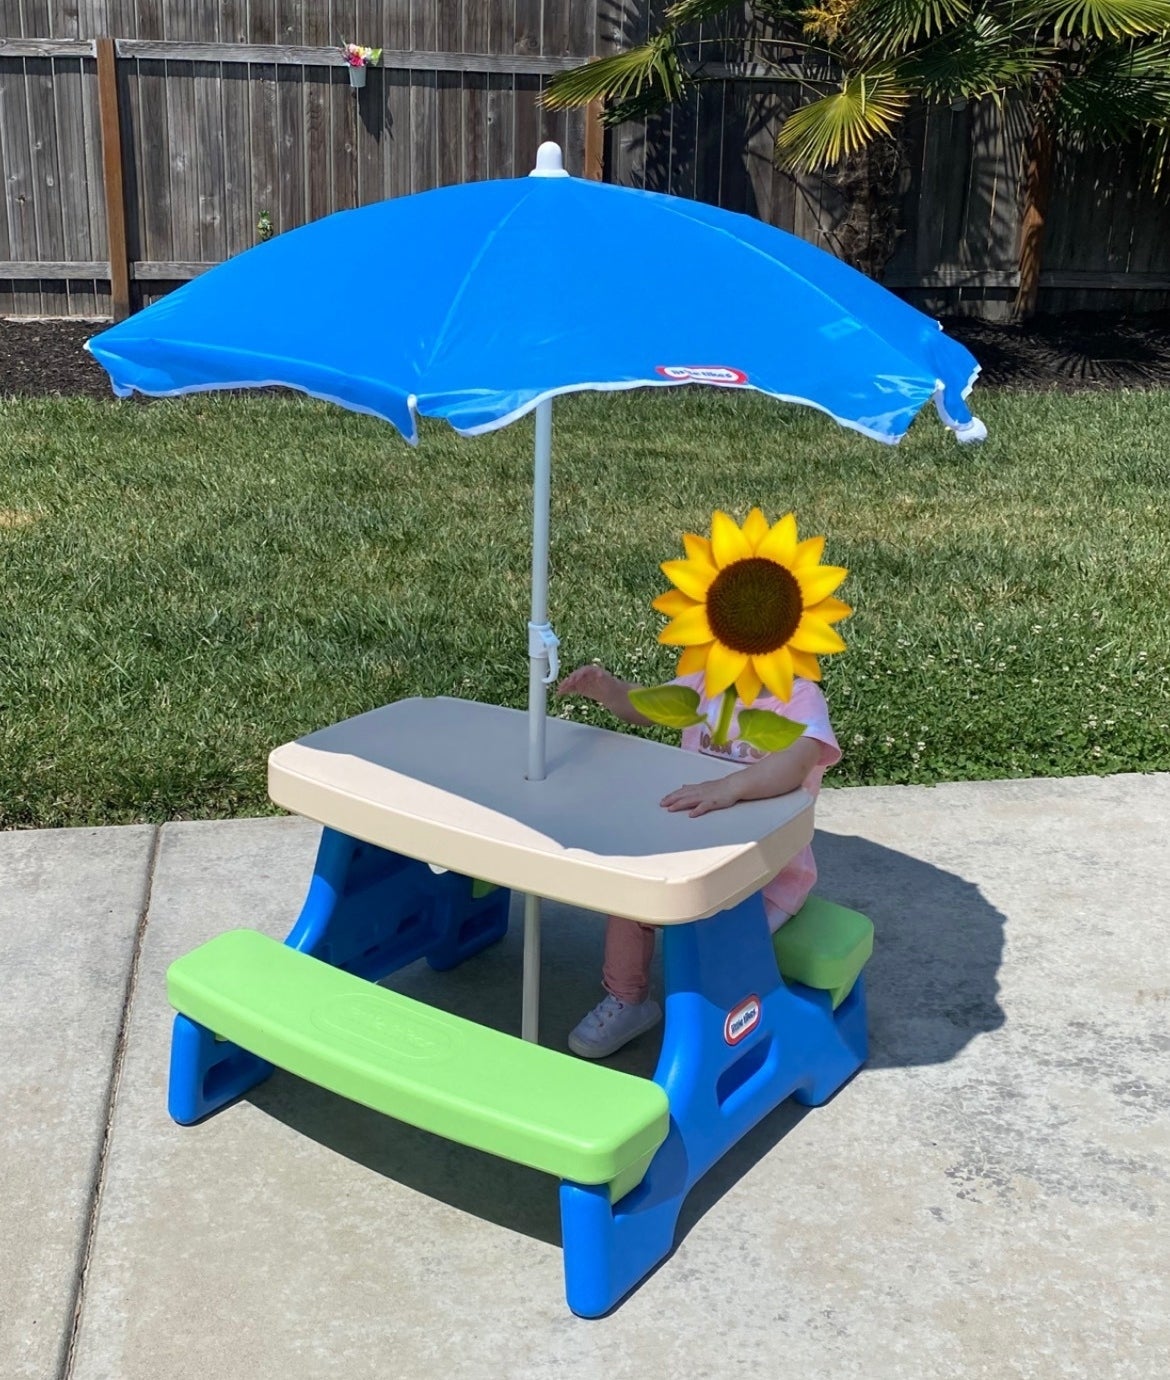 Child seated at a picnic table with an umbrella